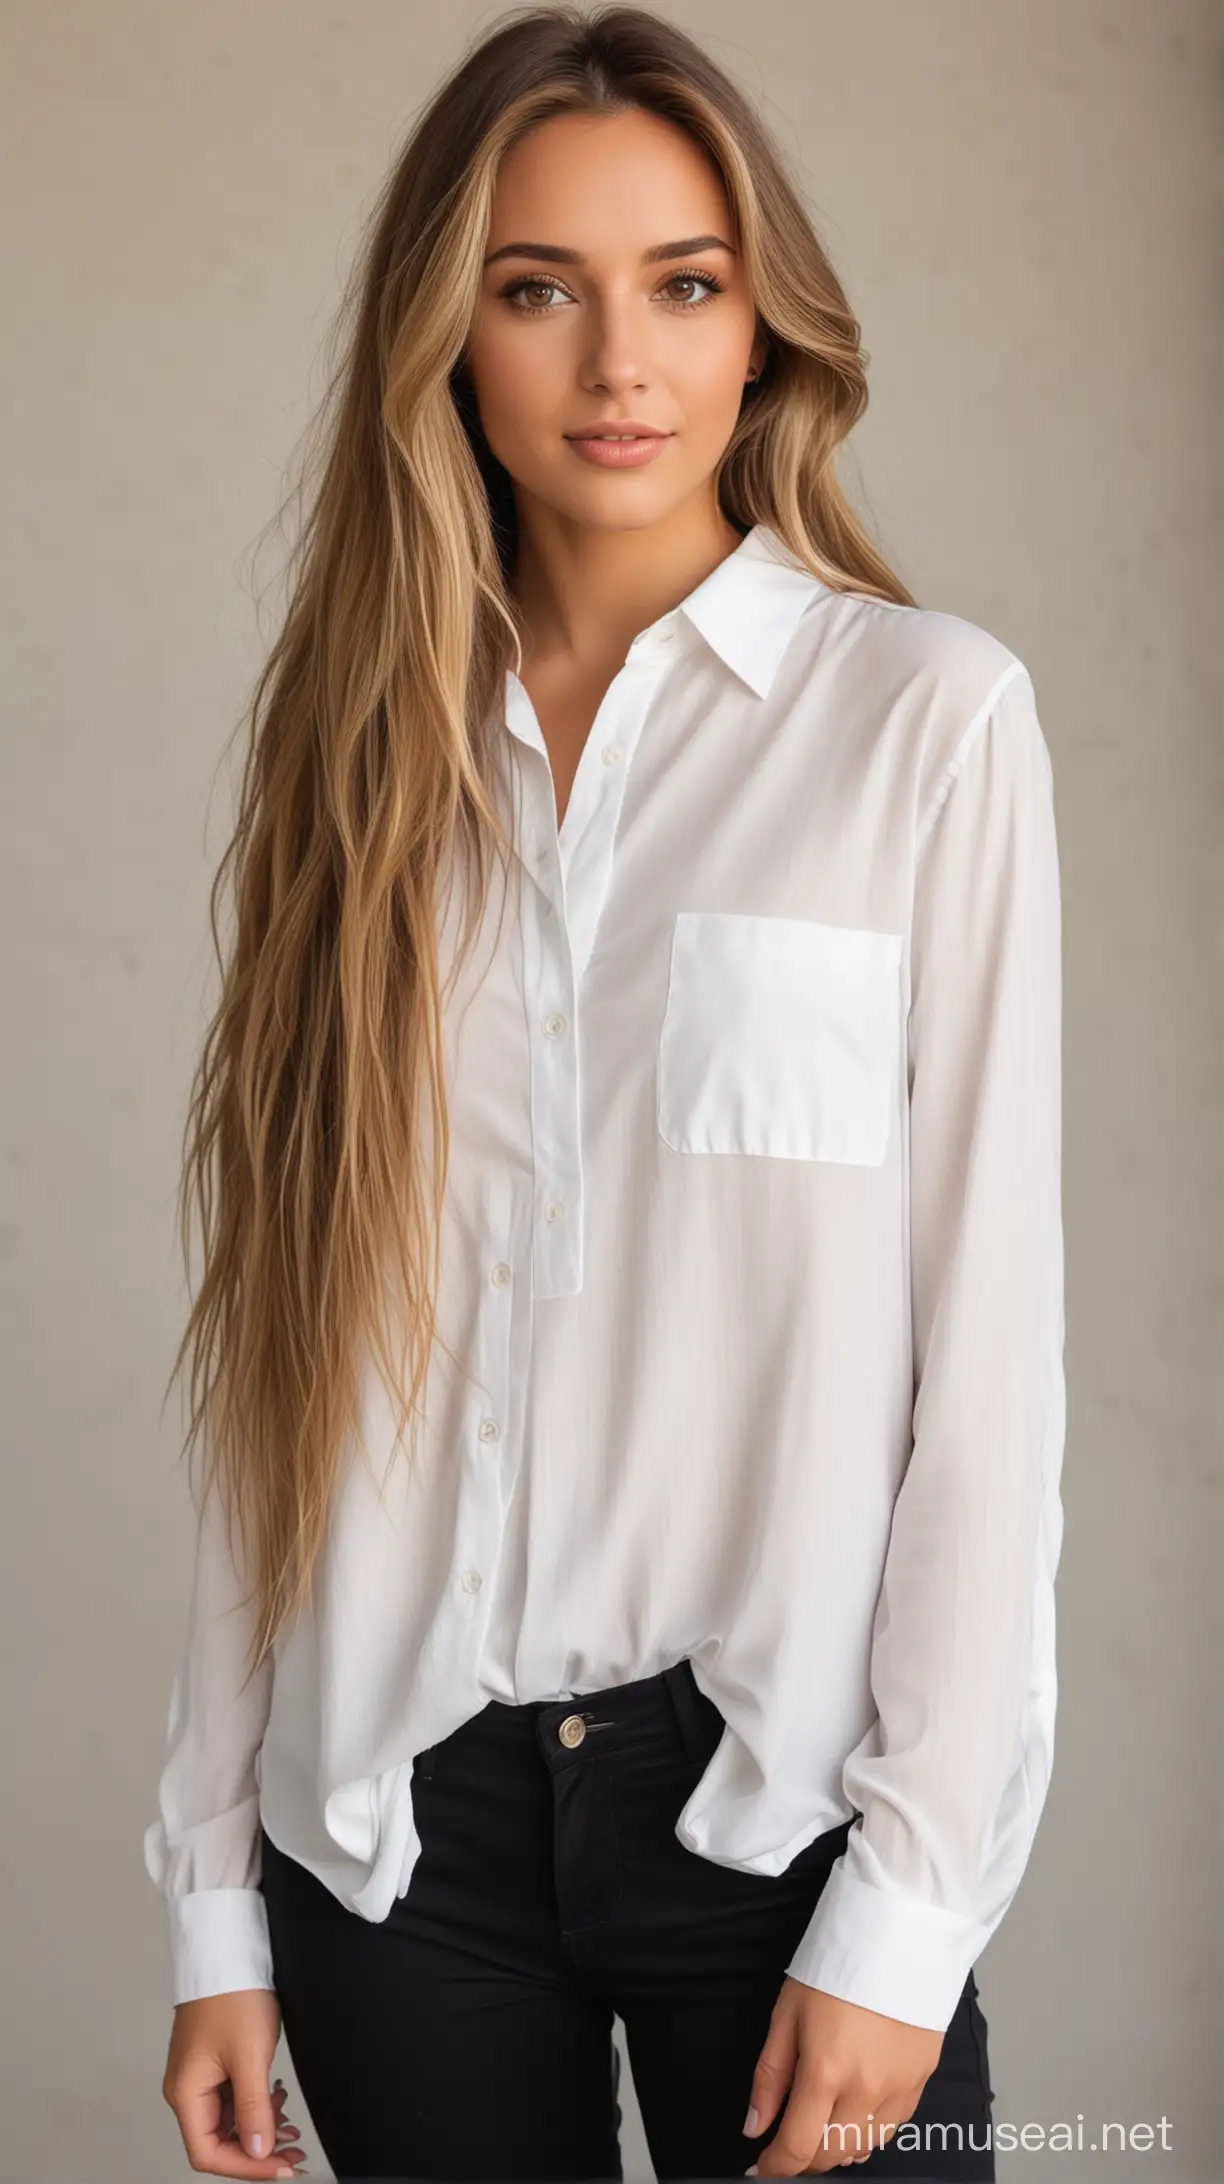 Chic Brunette with Long Blonde Hair in Elegant Monochrome Outfit